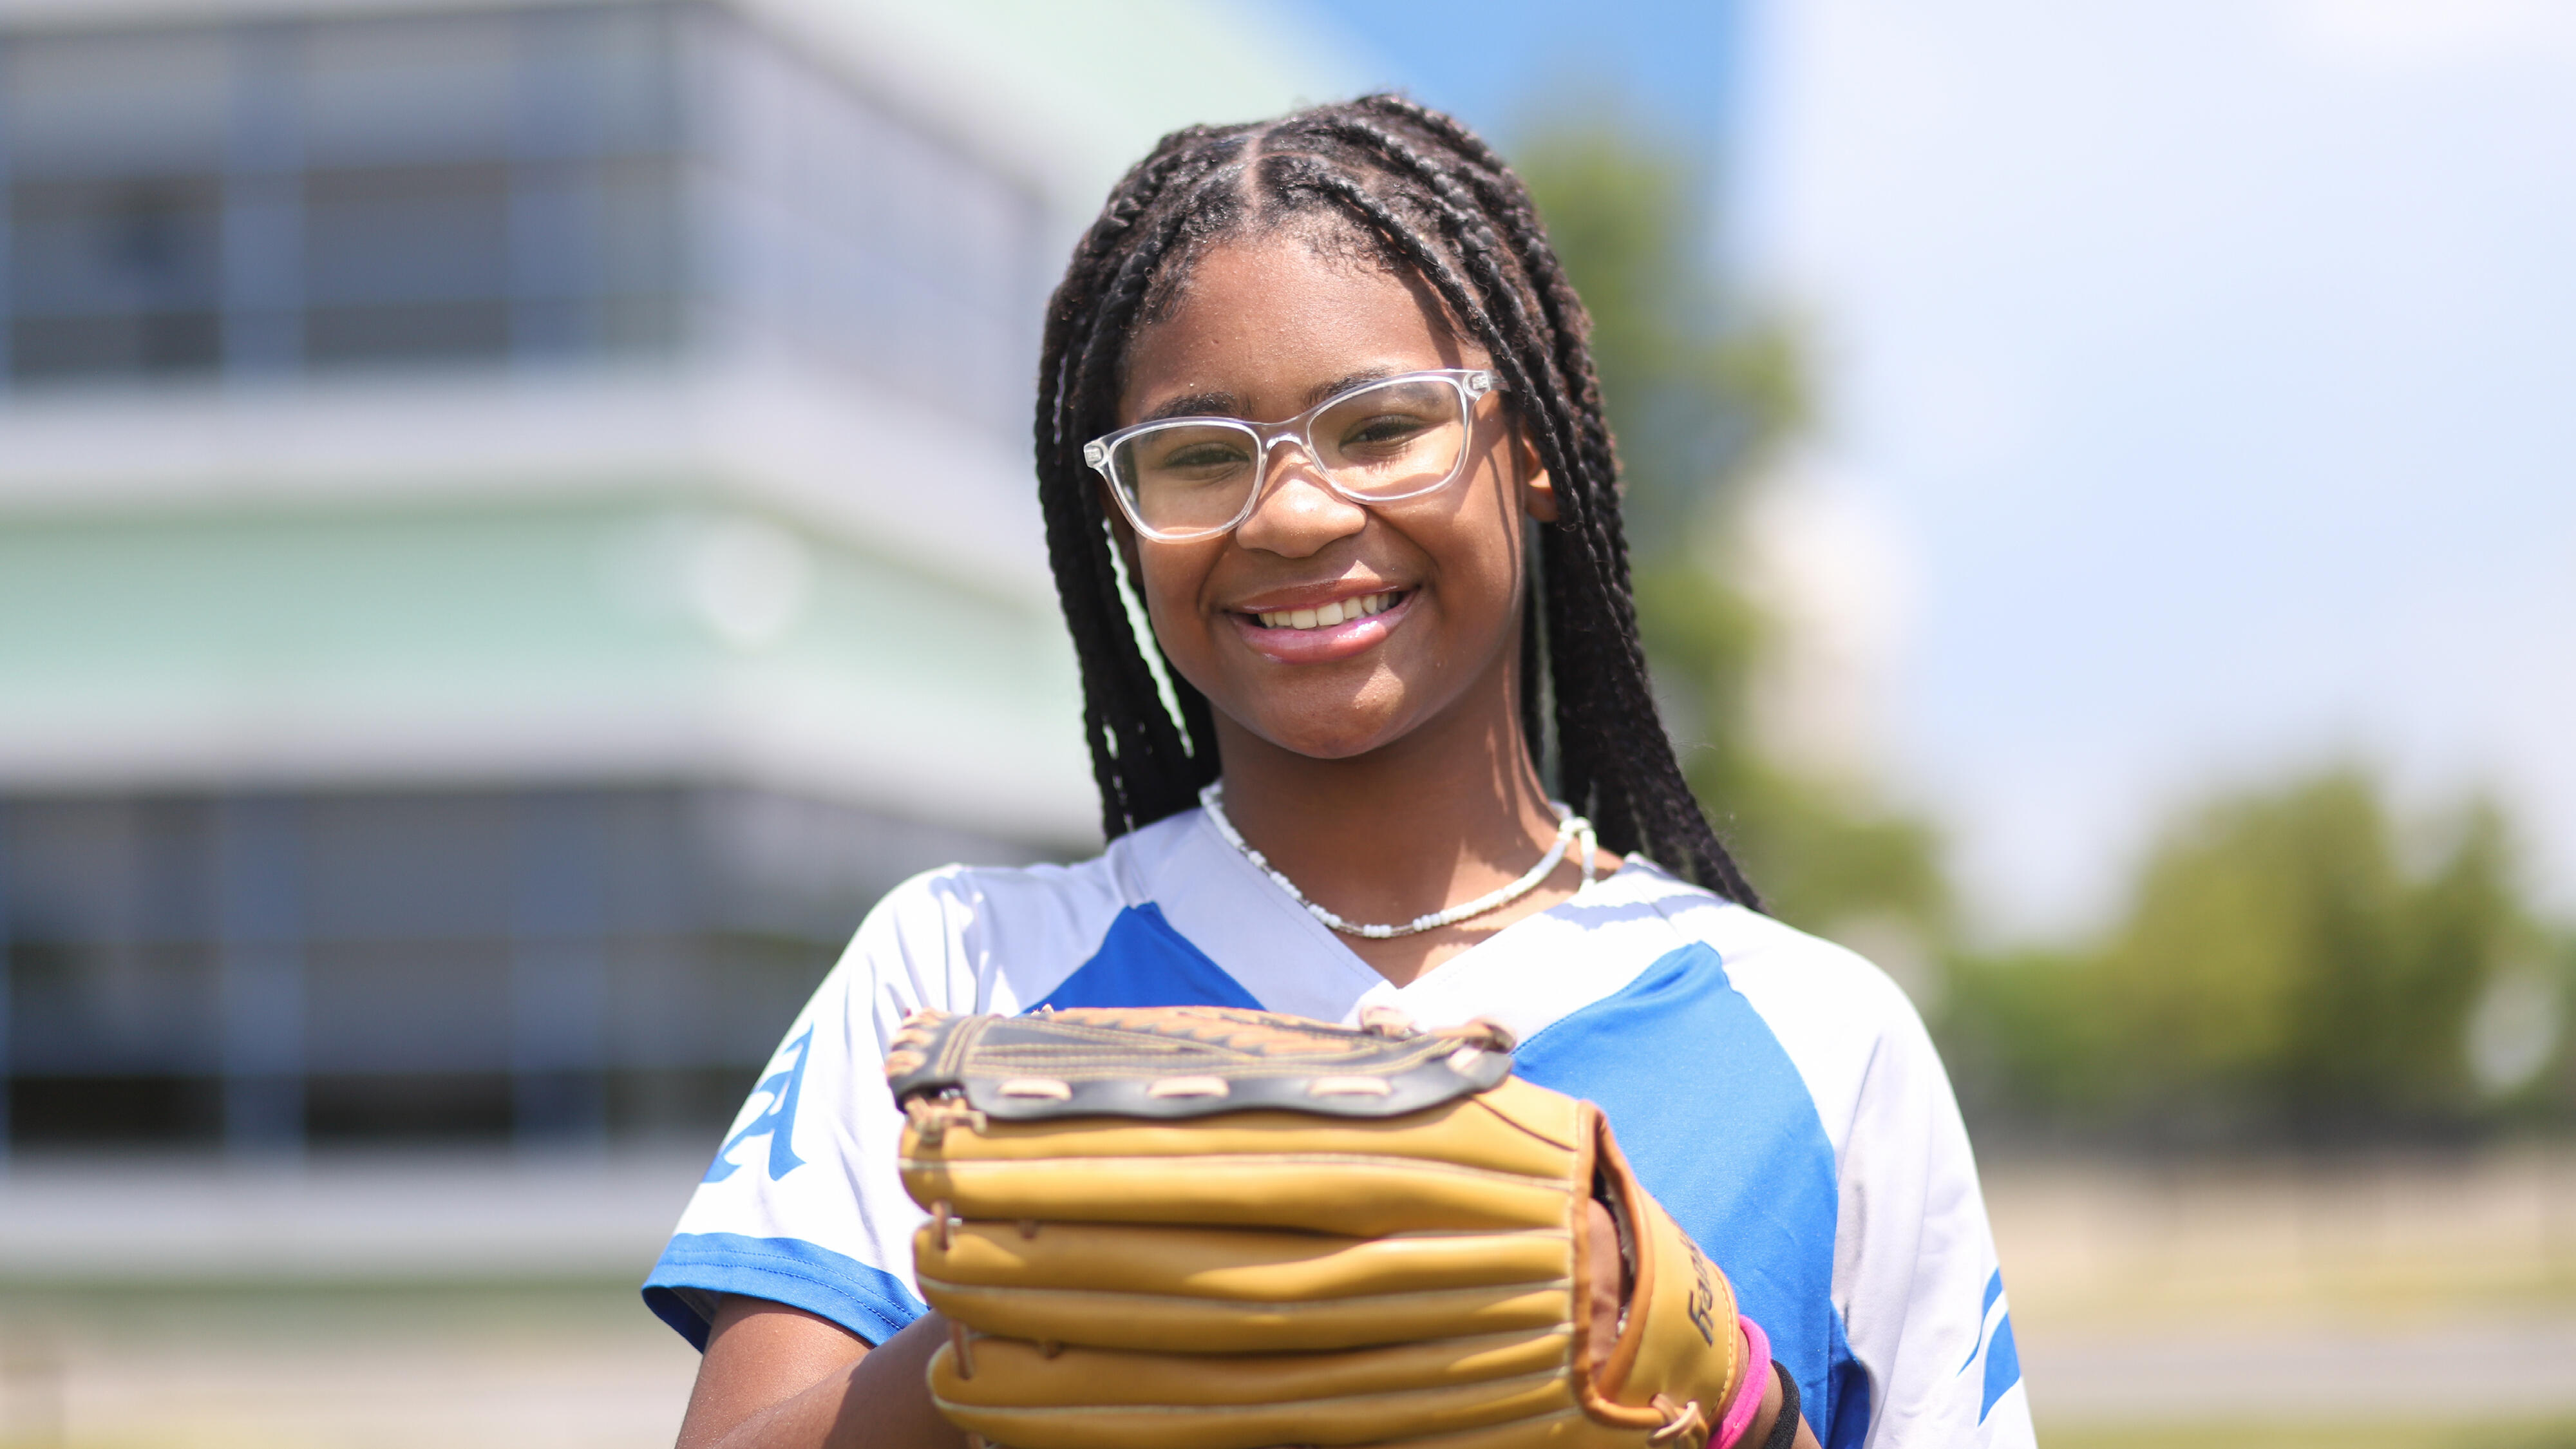 Student wearing a softball uniform and glove and smiling